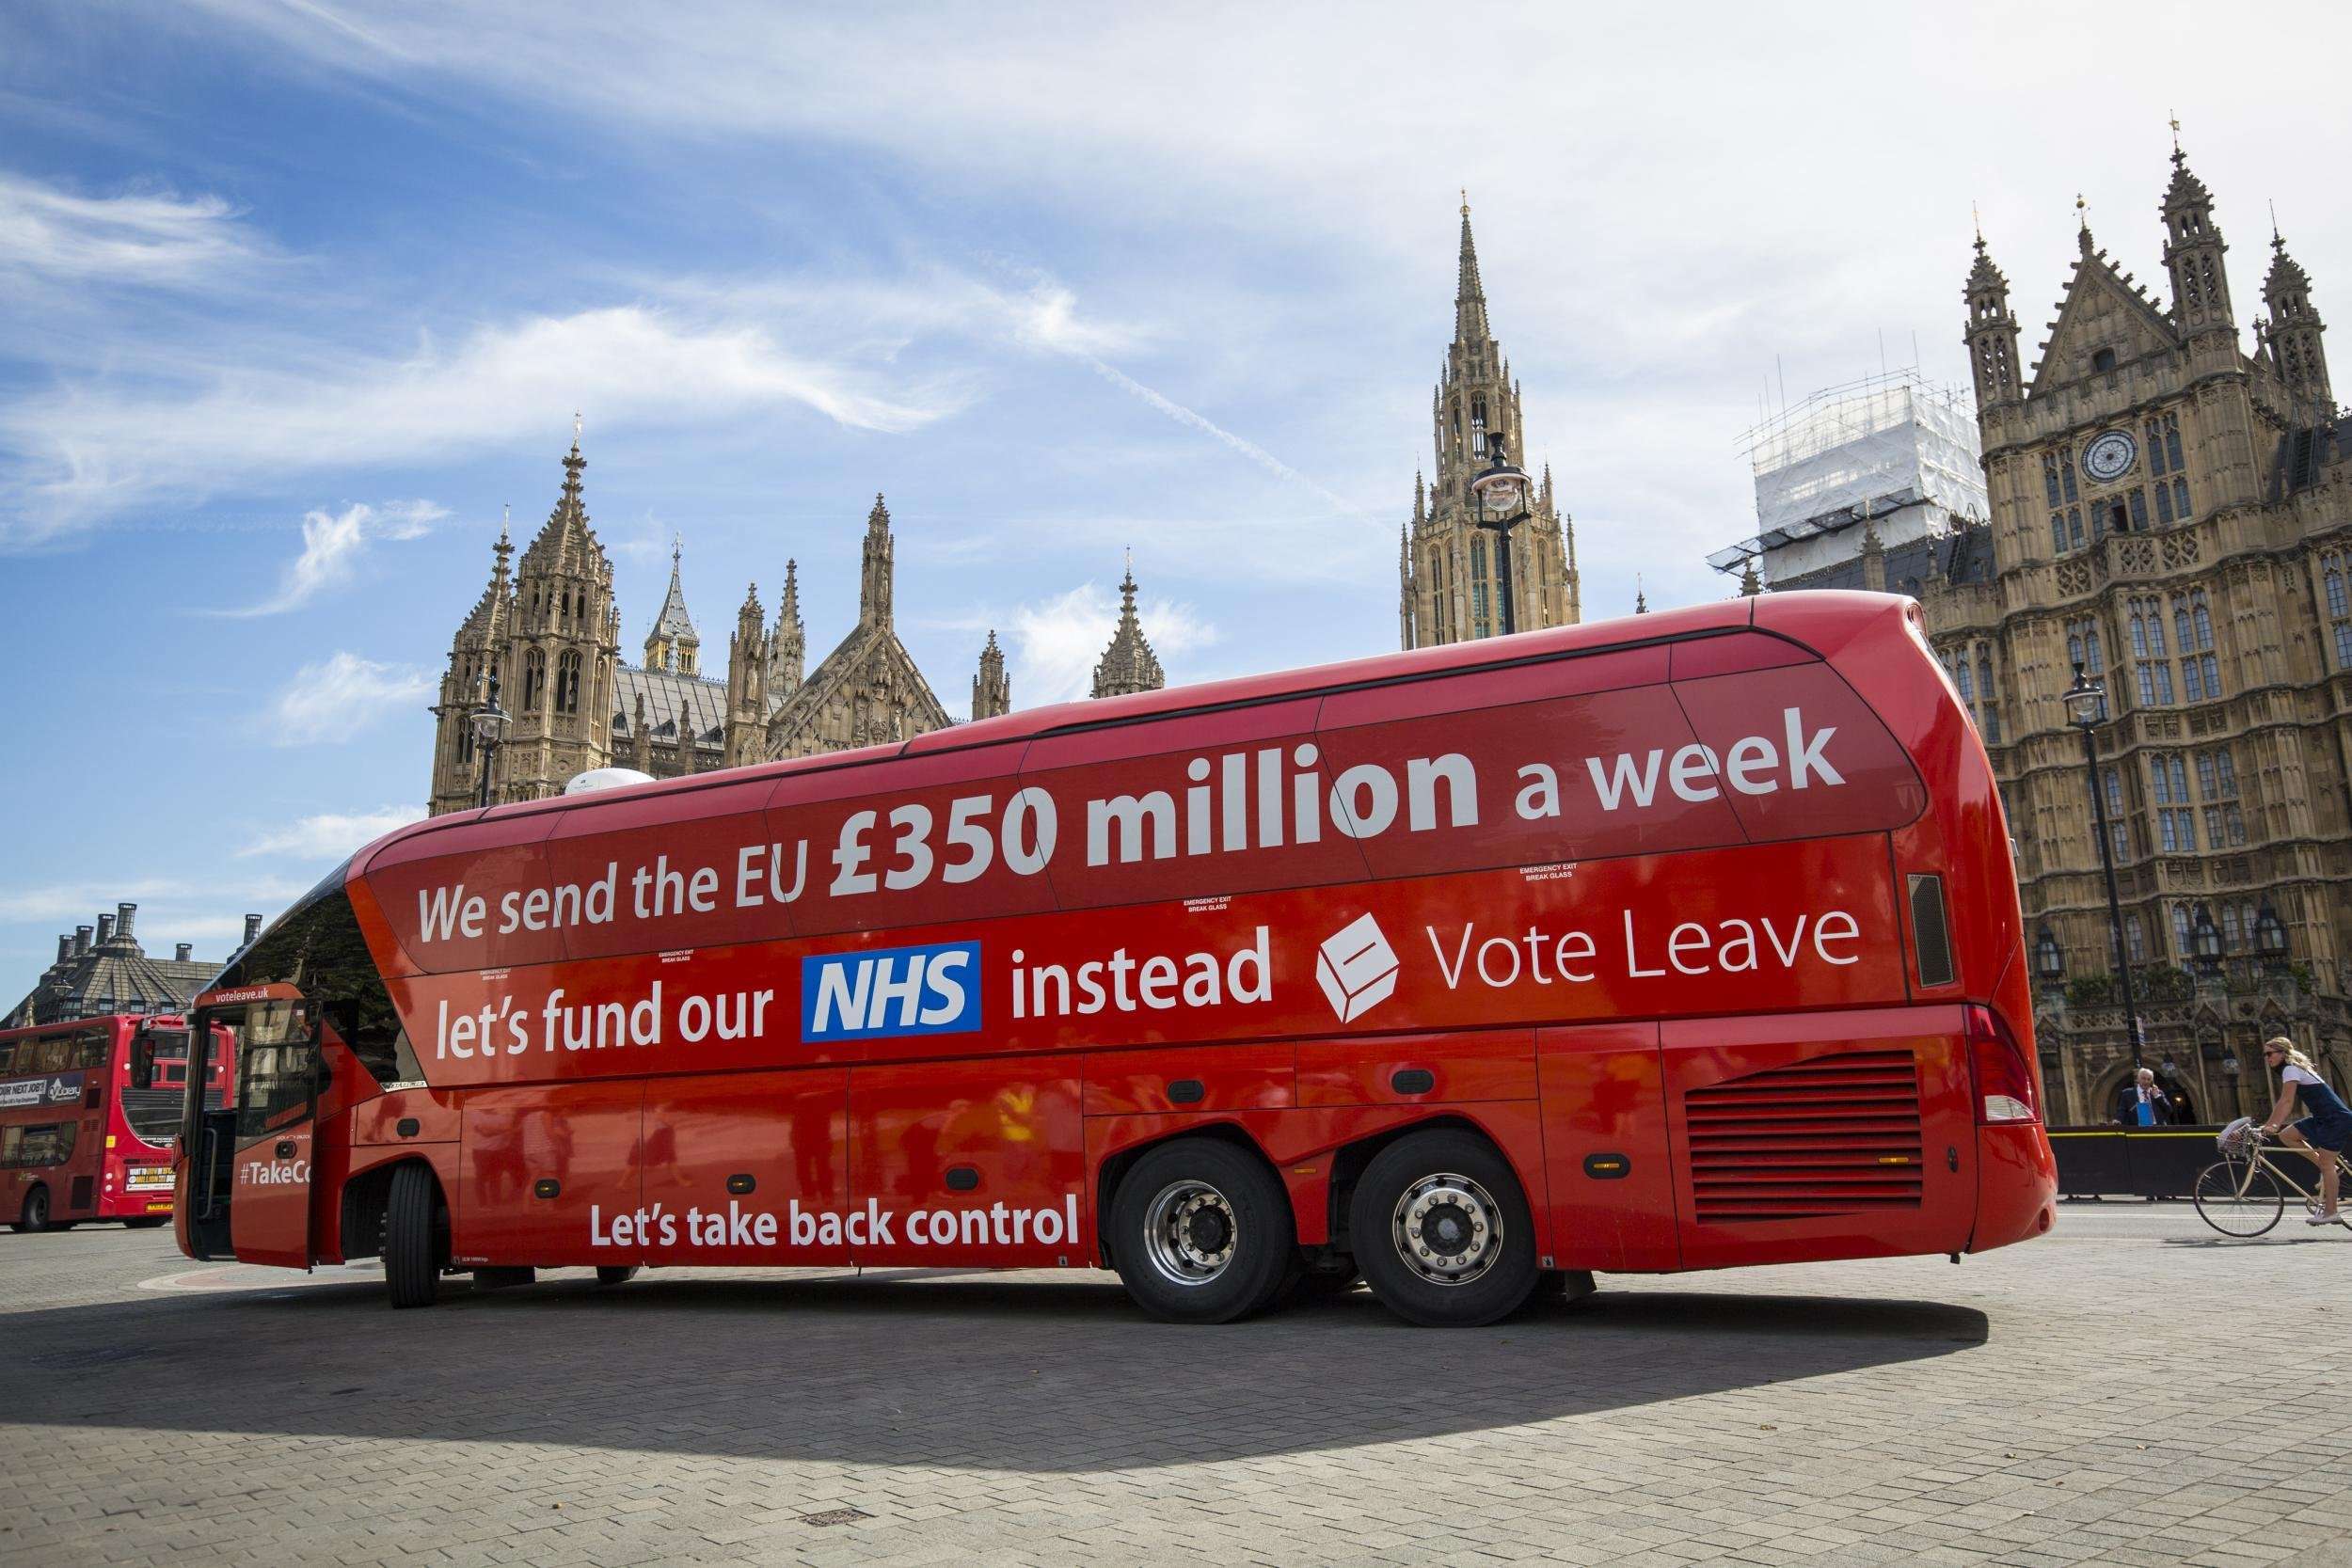 image for Brexit: Vote Leave chief who created £350m NHS claim on bus admits leaving EU could be 'an error'